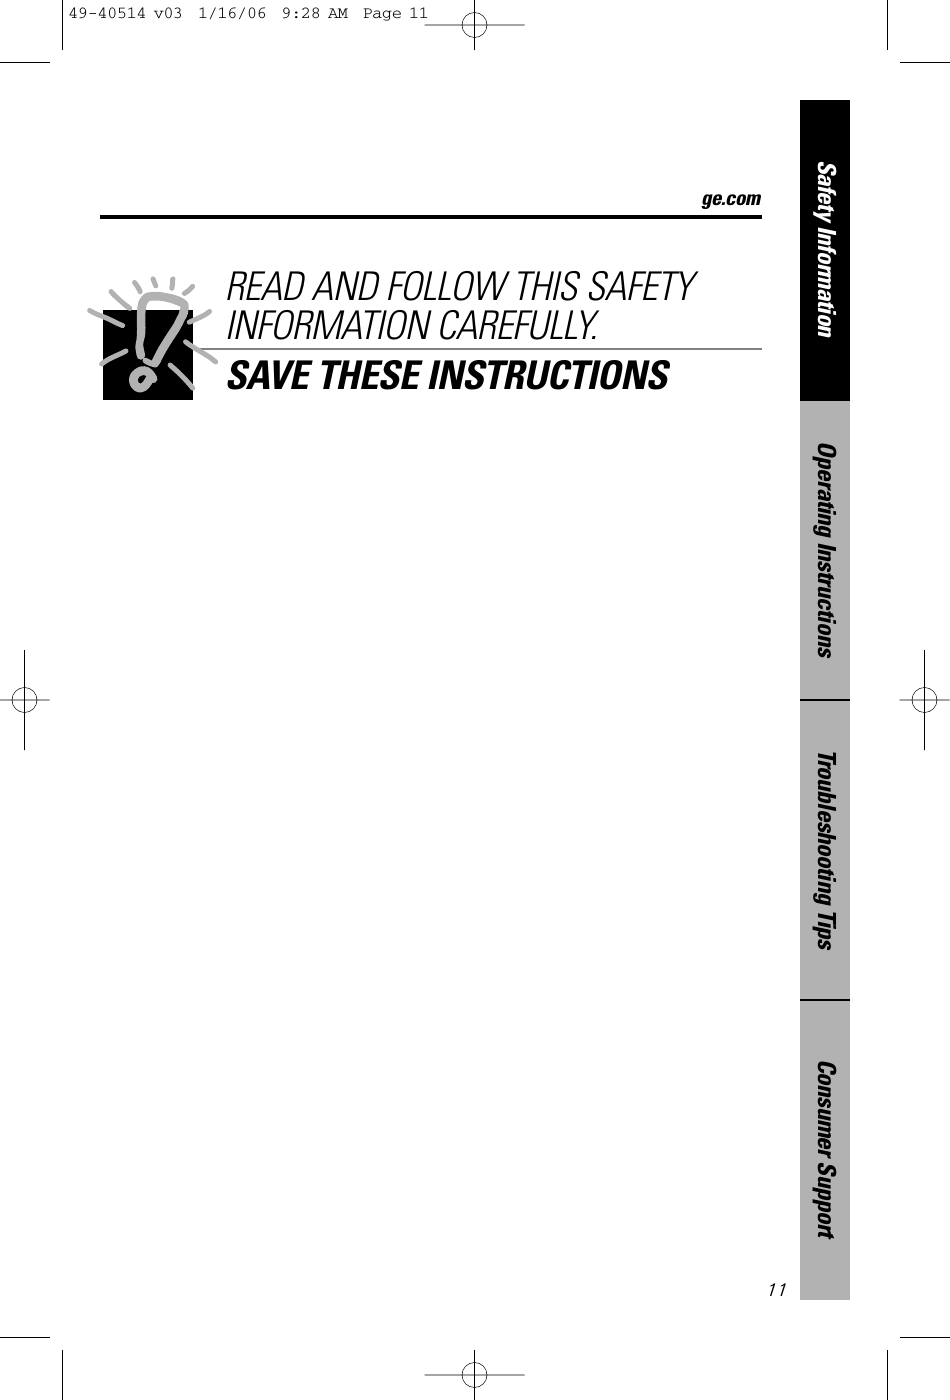 Consumer SupportTroubleshooting TipsOperating InstructionsSafety Information11READ AND FOLLOW THIS SAFETYINFORMATION CAREFULLY.SAVE THESE INSTRUCTIONSge.com49-40514 v03  1/16/06  9:28 AM  Page 11